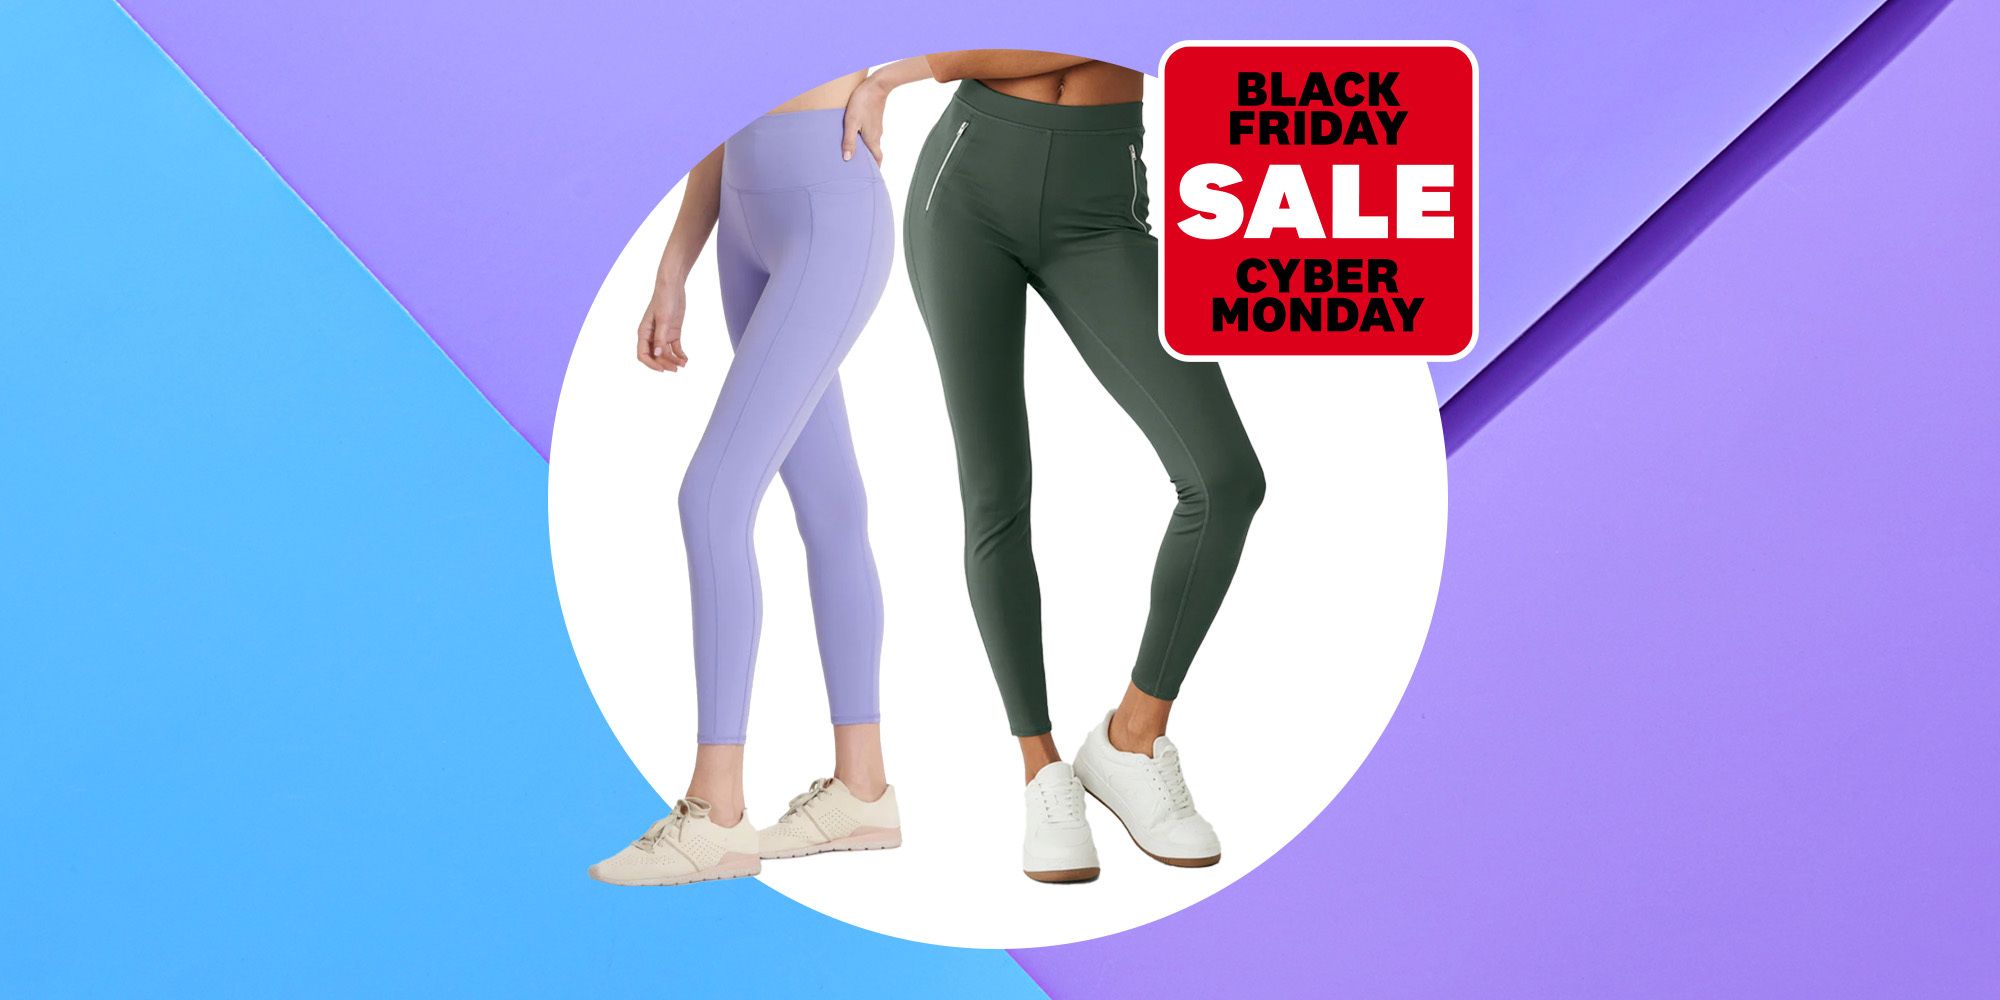 The Best Black Friday Legging Deals Up To 70 Off Top Brands